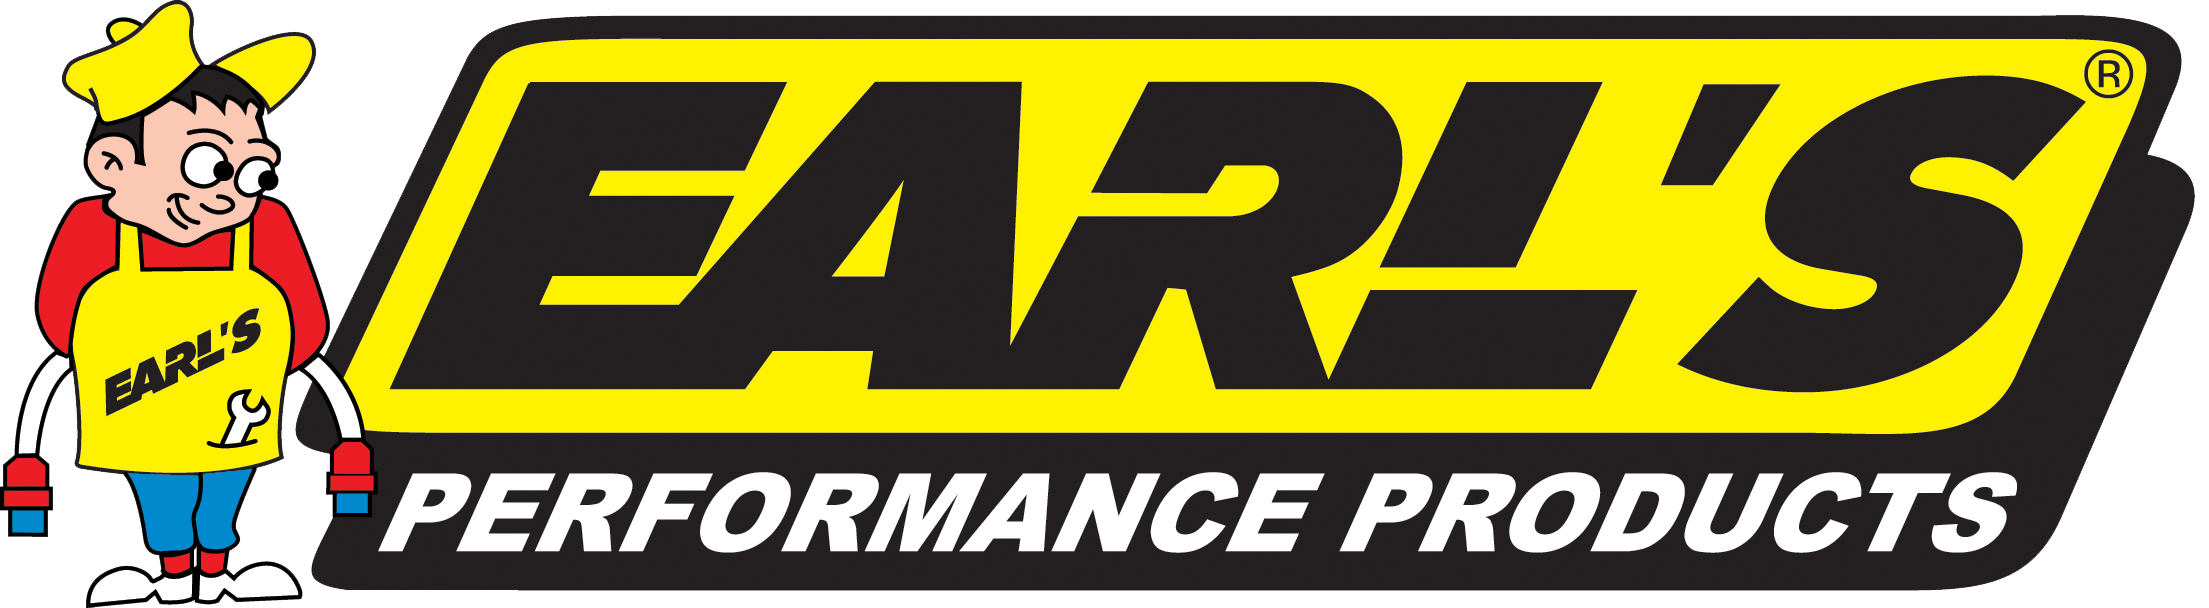 Earl's Logo - Earls Performance Products UK - Braided Hose and Fittings